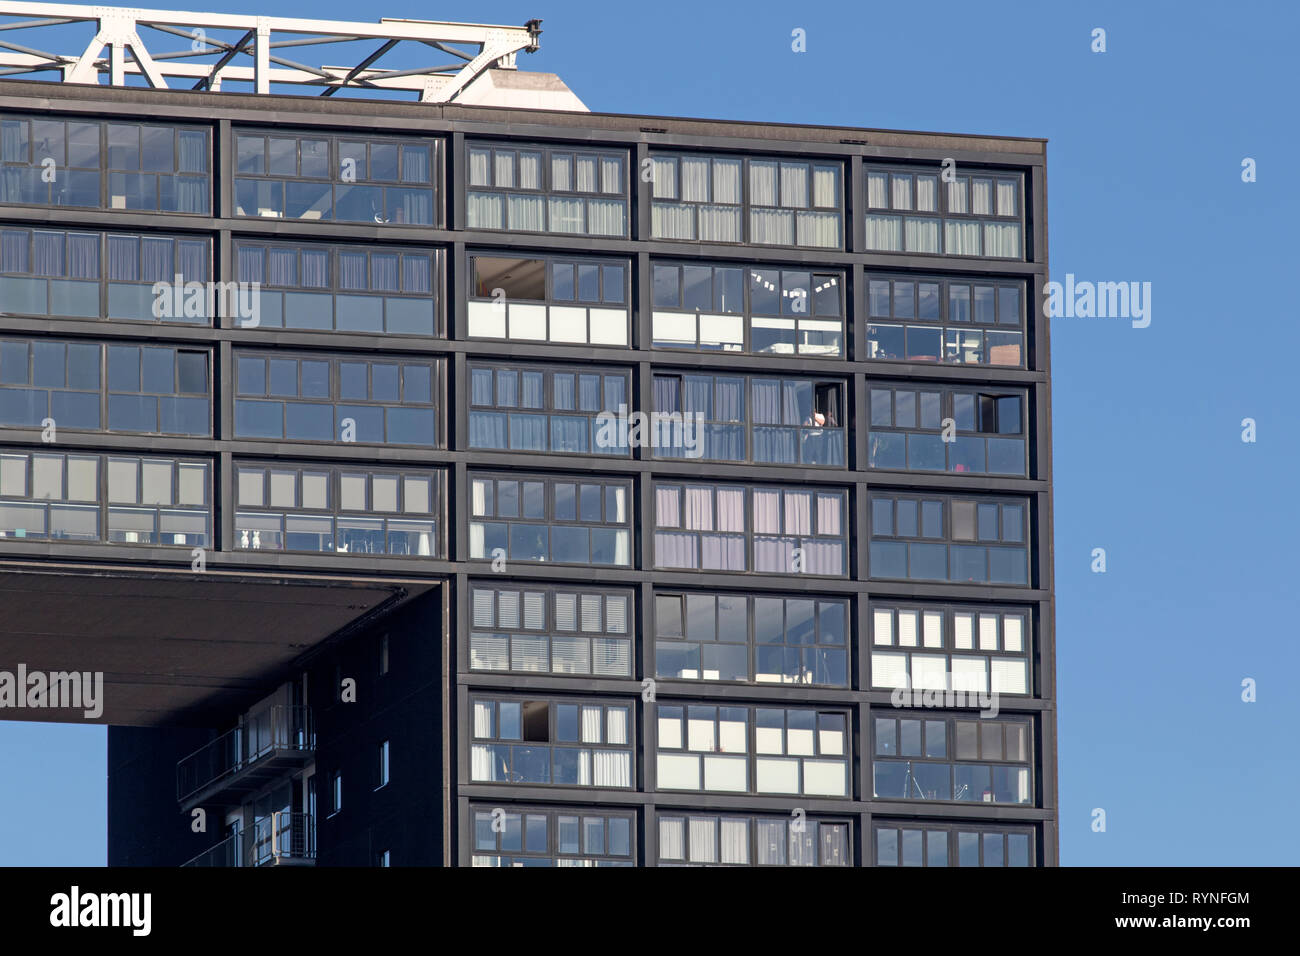 GRONINGEN,hOLLAND - 15 FEBRUARY ,2019 : Tasman tower. The Tasman tower consists of two residential towers that are connected at the top with a 'bridge Stock Photo